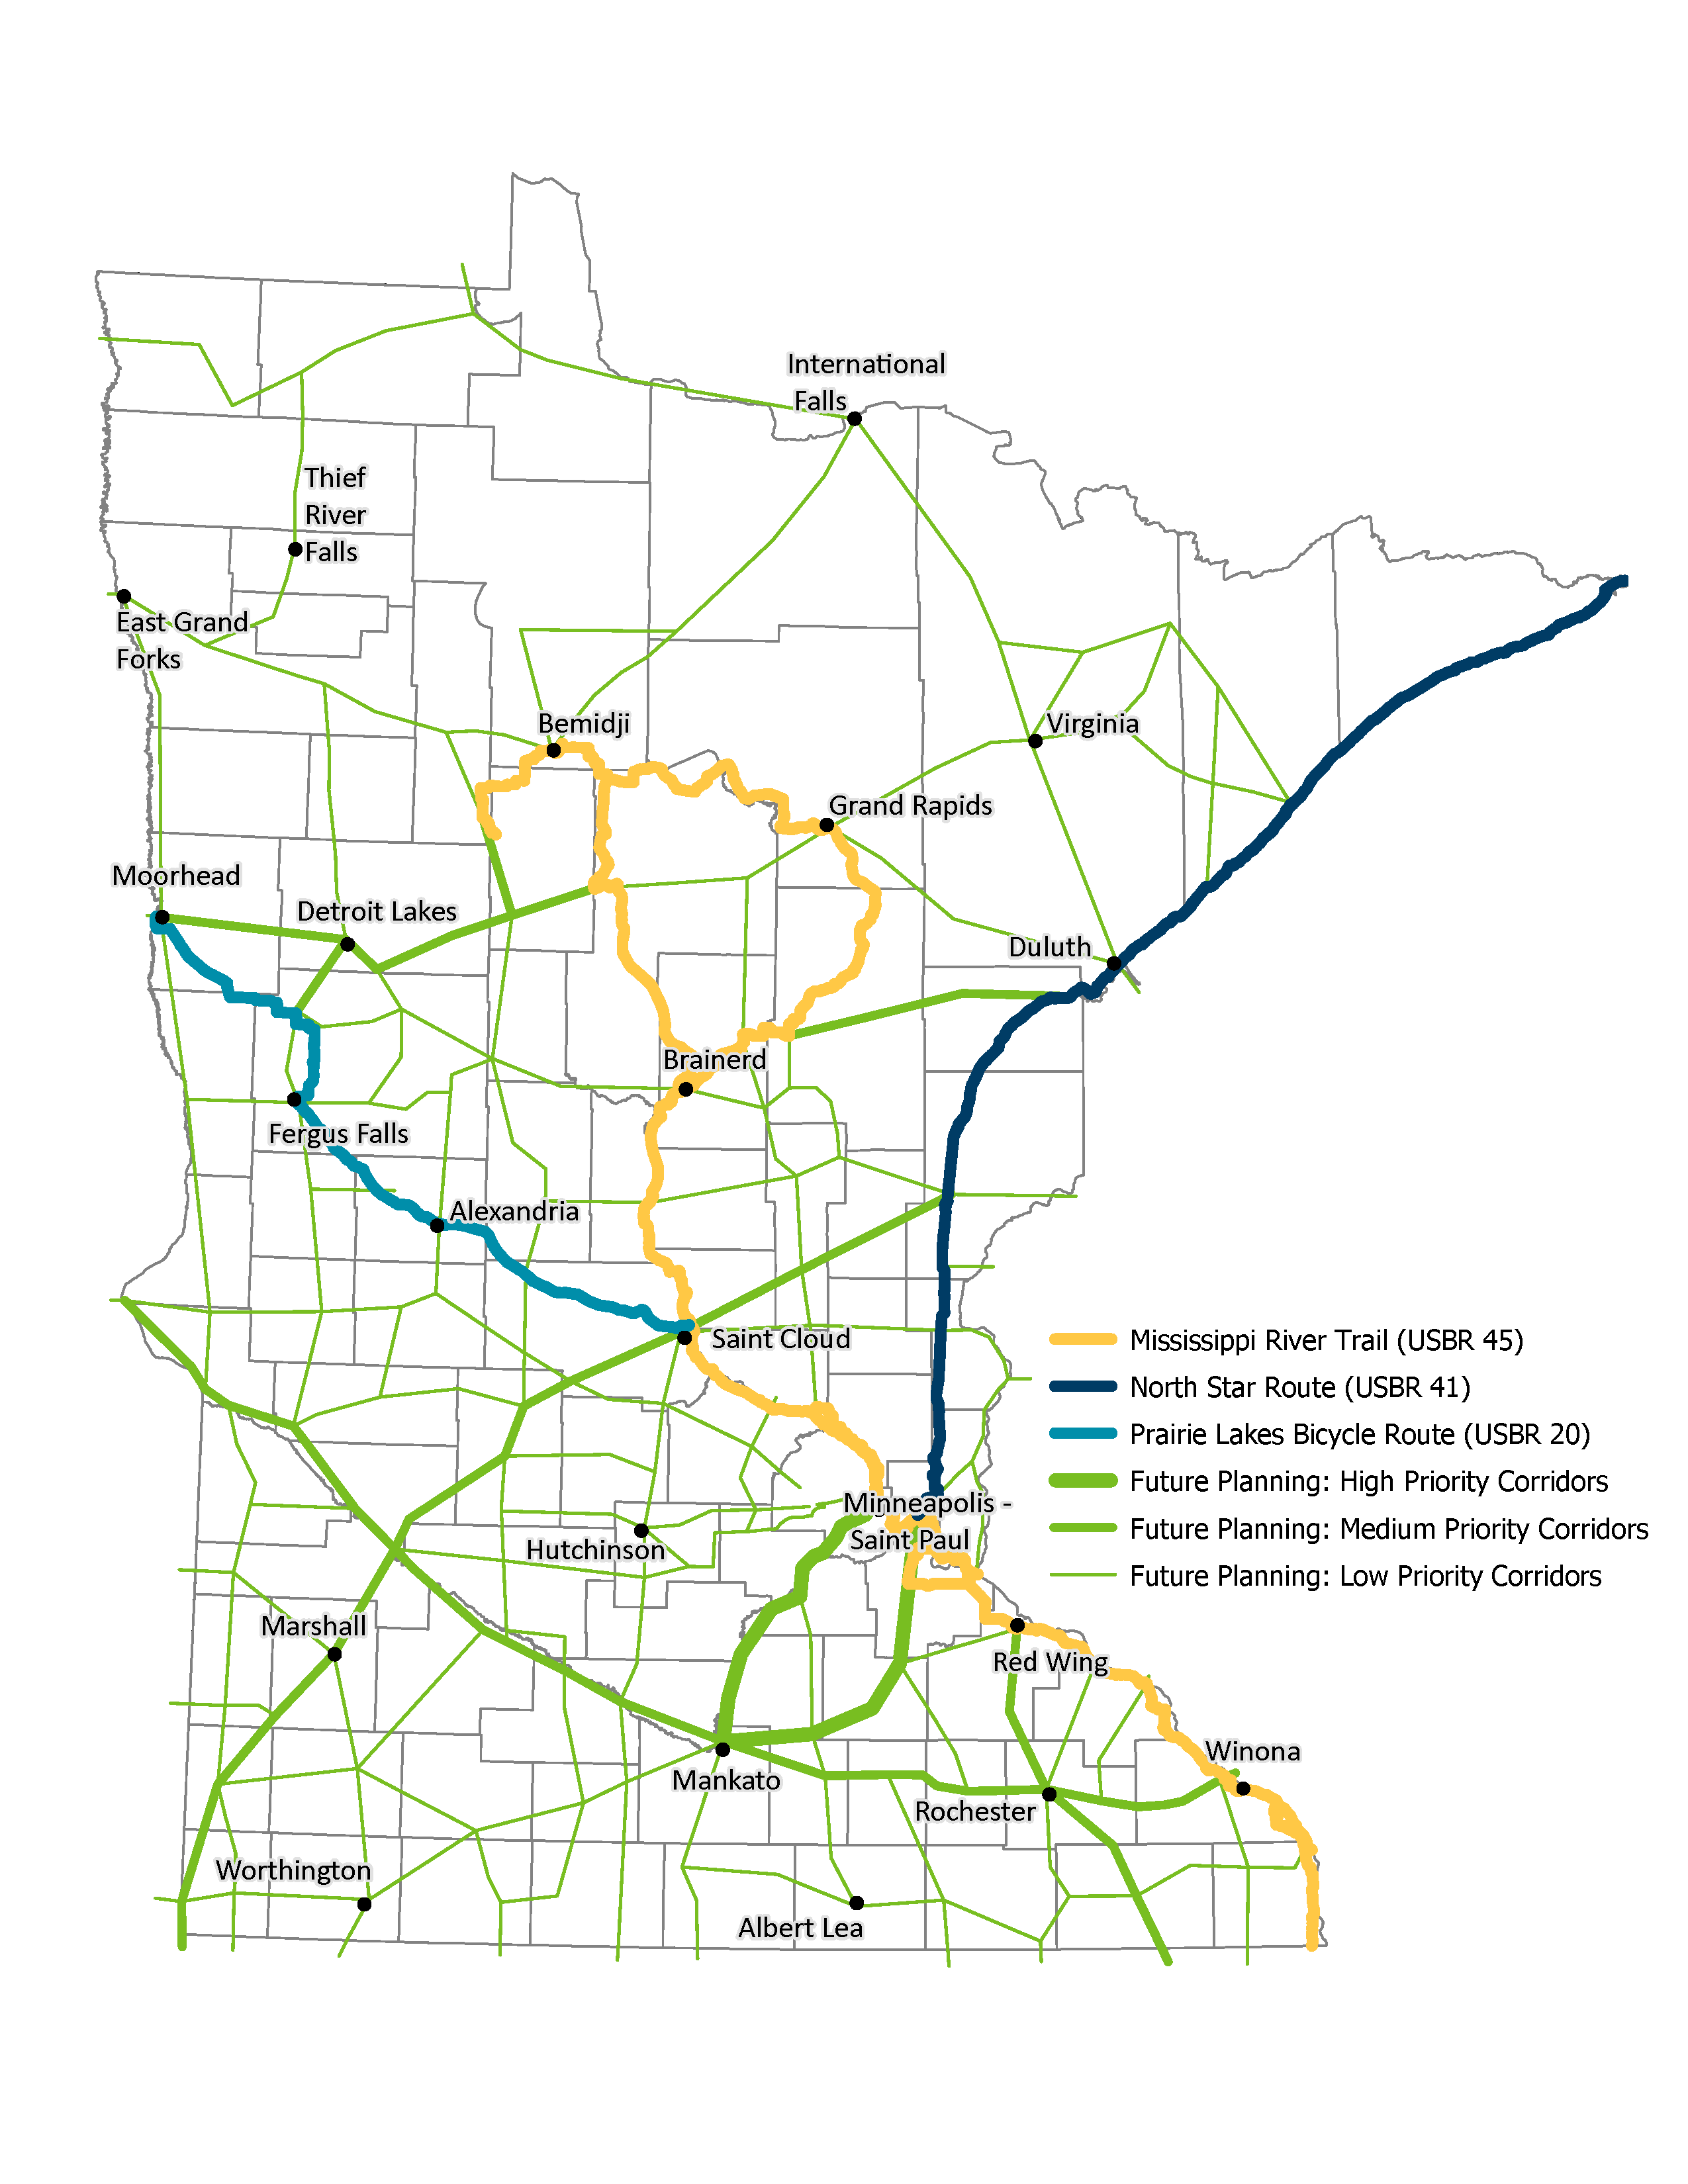 Minnesota map showing location of North Star Route that starts in Minneapolis-St. Paul and goes up to the Canadian border. The map also shows the Mississippi River Trail which spans from south of Winona through the Twin Cities, St. Cloud, up into Brainerd, Grand Rapids and the Bemidji area. The map also includes future priority bicycle corridors. 